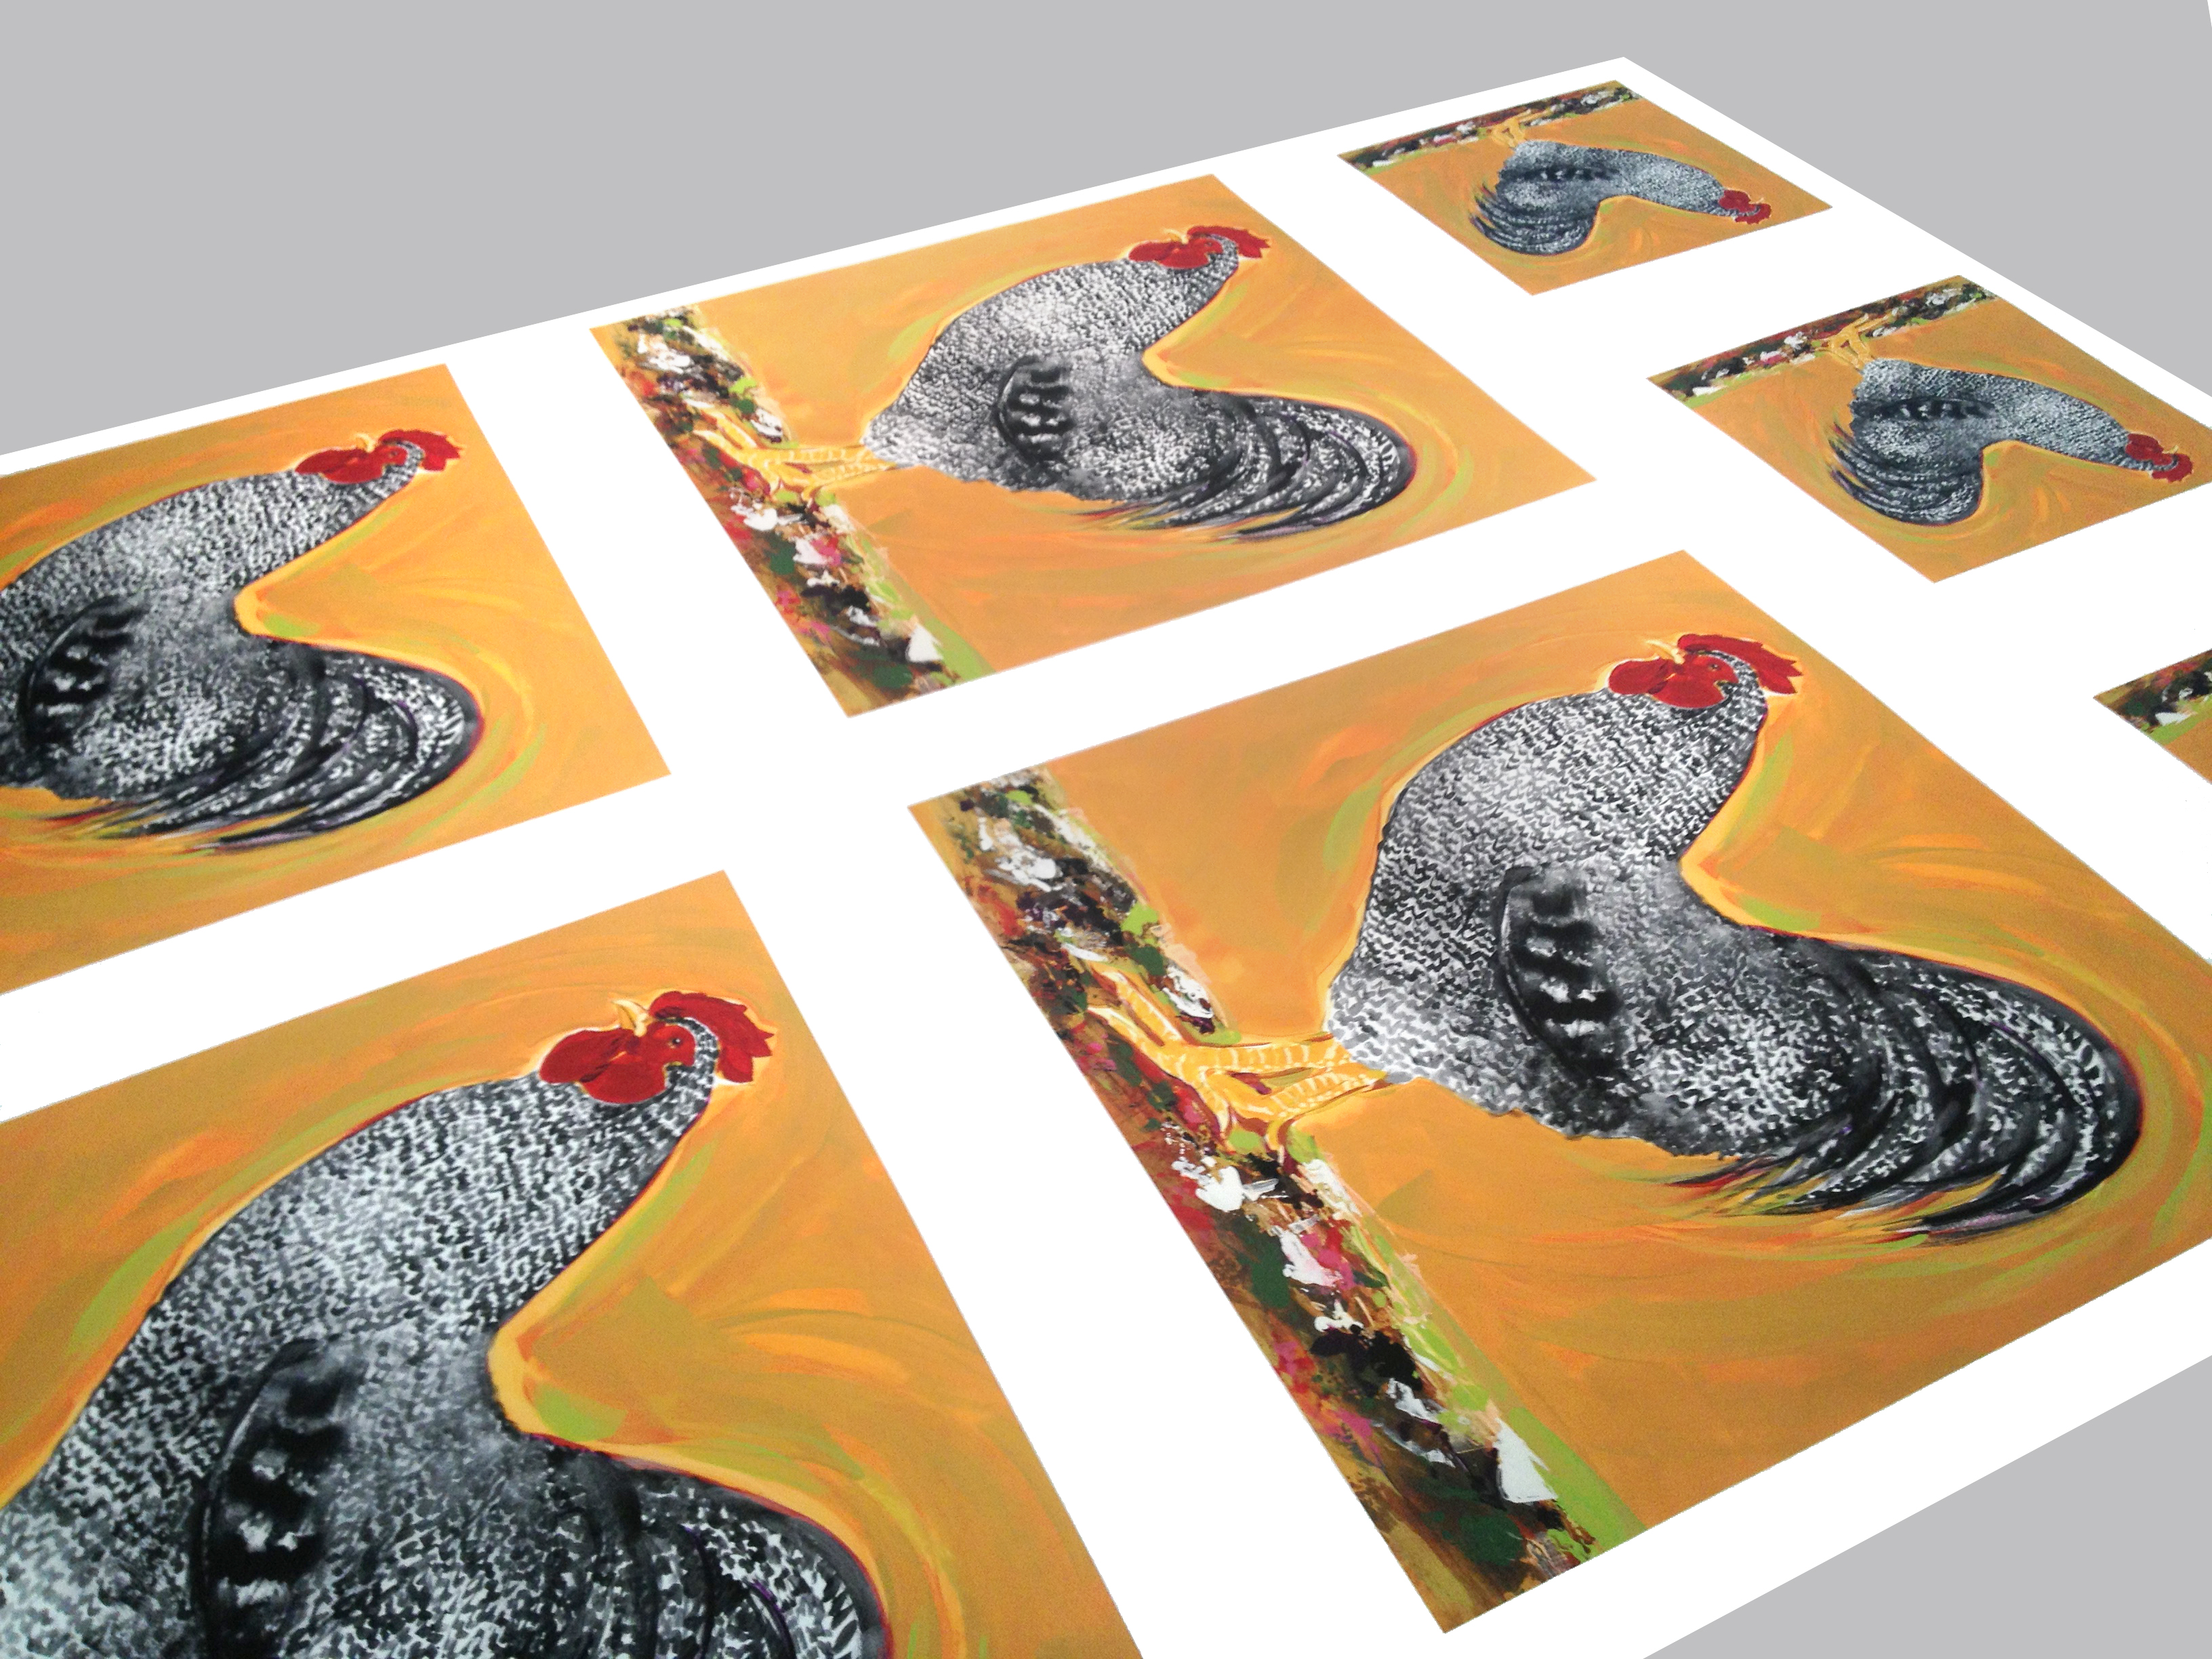 Limited edition prints featuring a rooster on an orange background, artwork by Virginia artist Matthew Johnson.